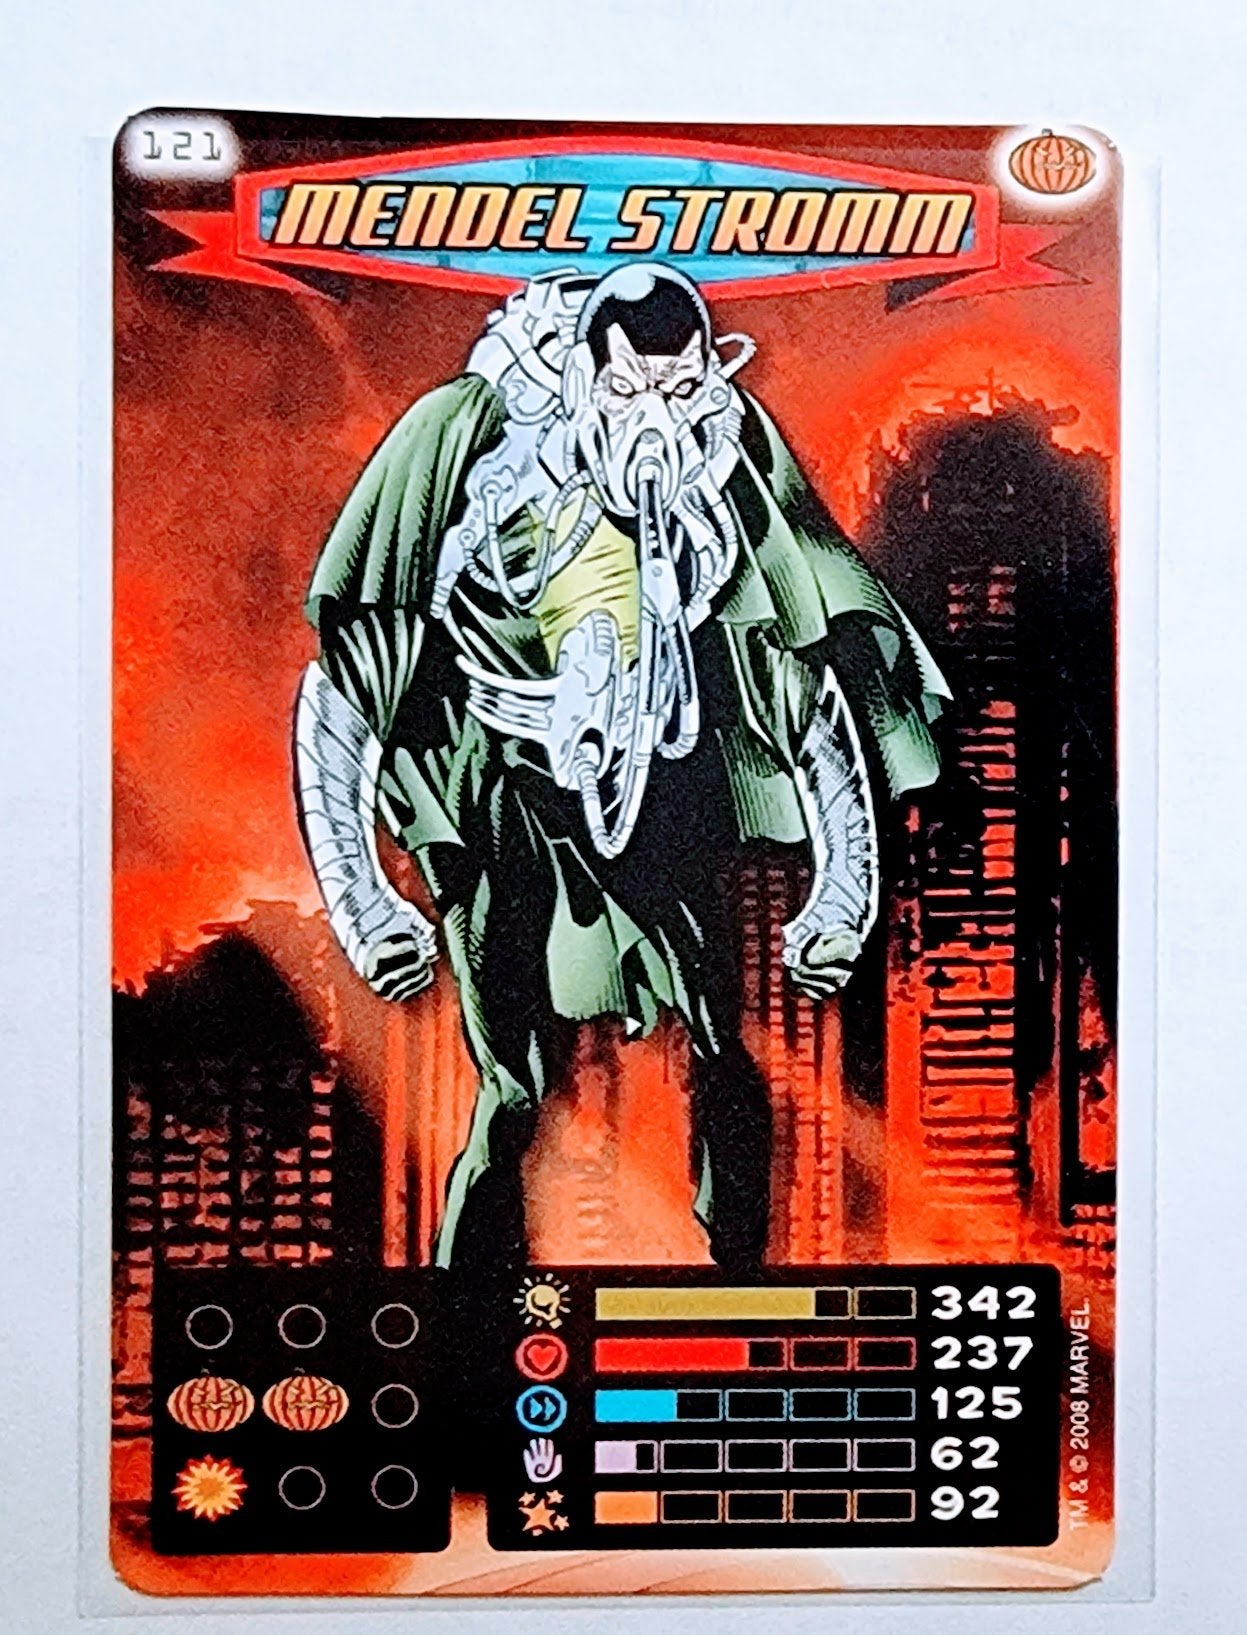 2008 Spiderman Heroes and Villains Mendel Stromm #121 Marvel Booster Trading Card UPTI simple Xclusive Collectibles   